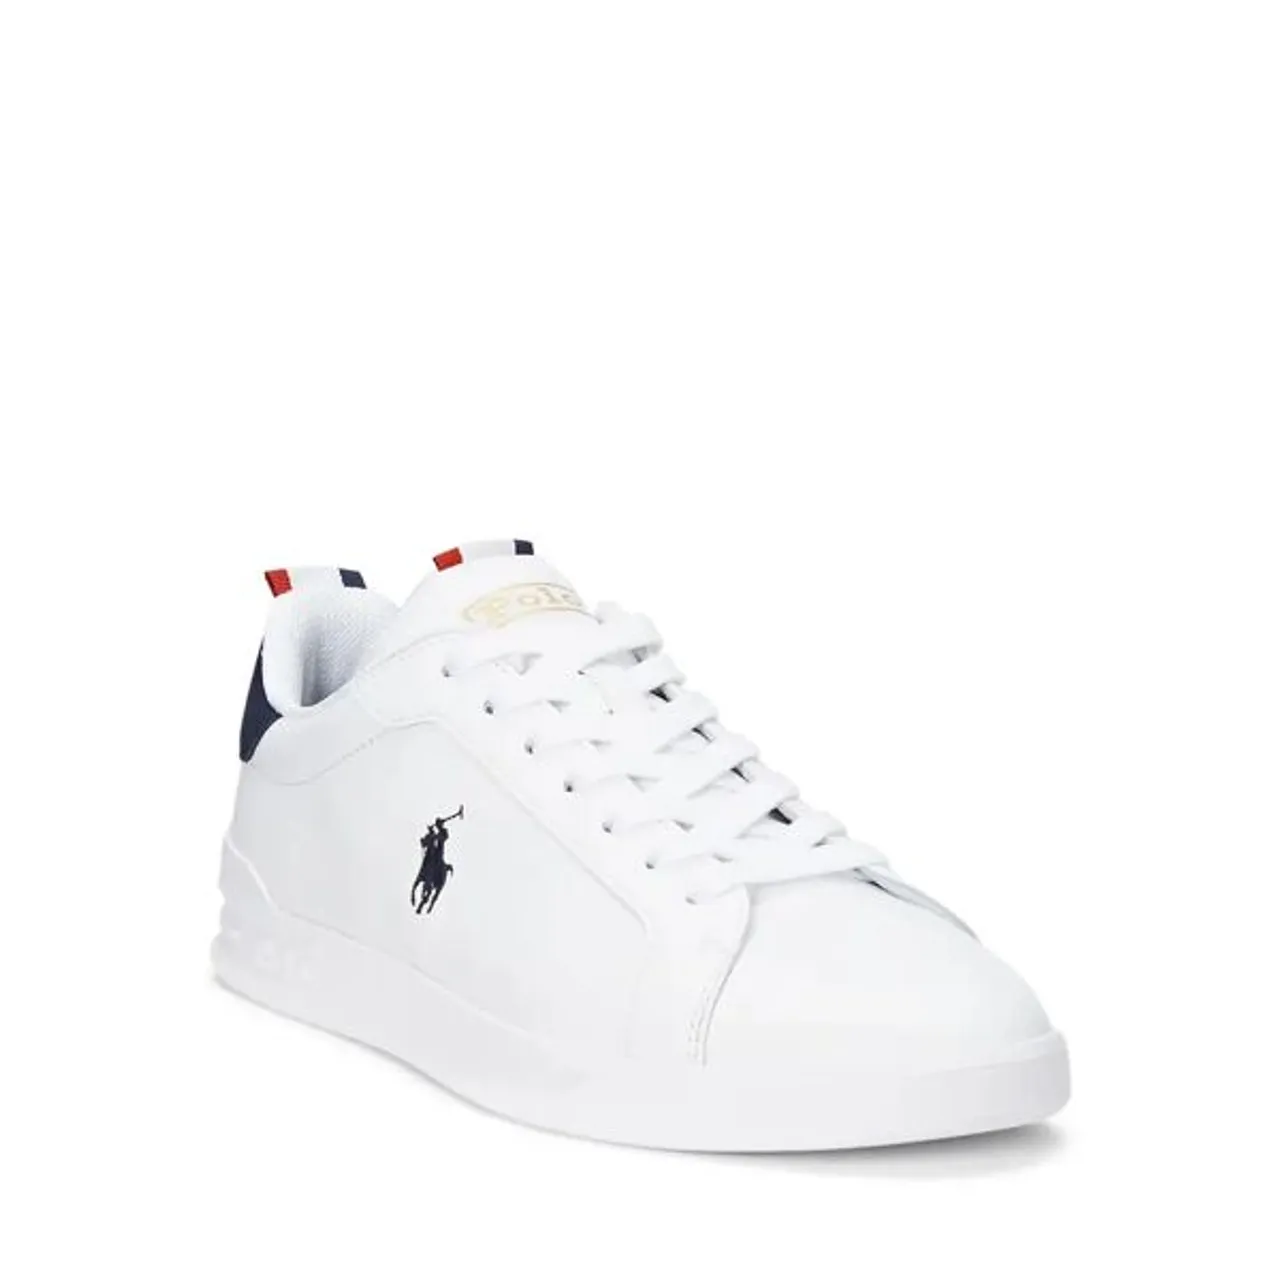 Ralph Lauren Heritage Court II Leather Trainers - White/Navy - Male